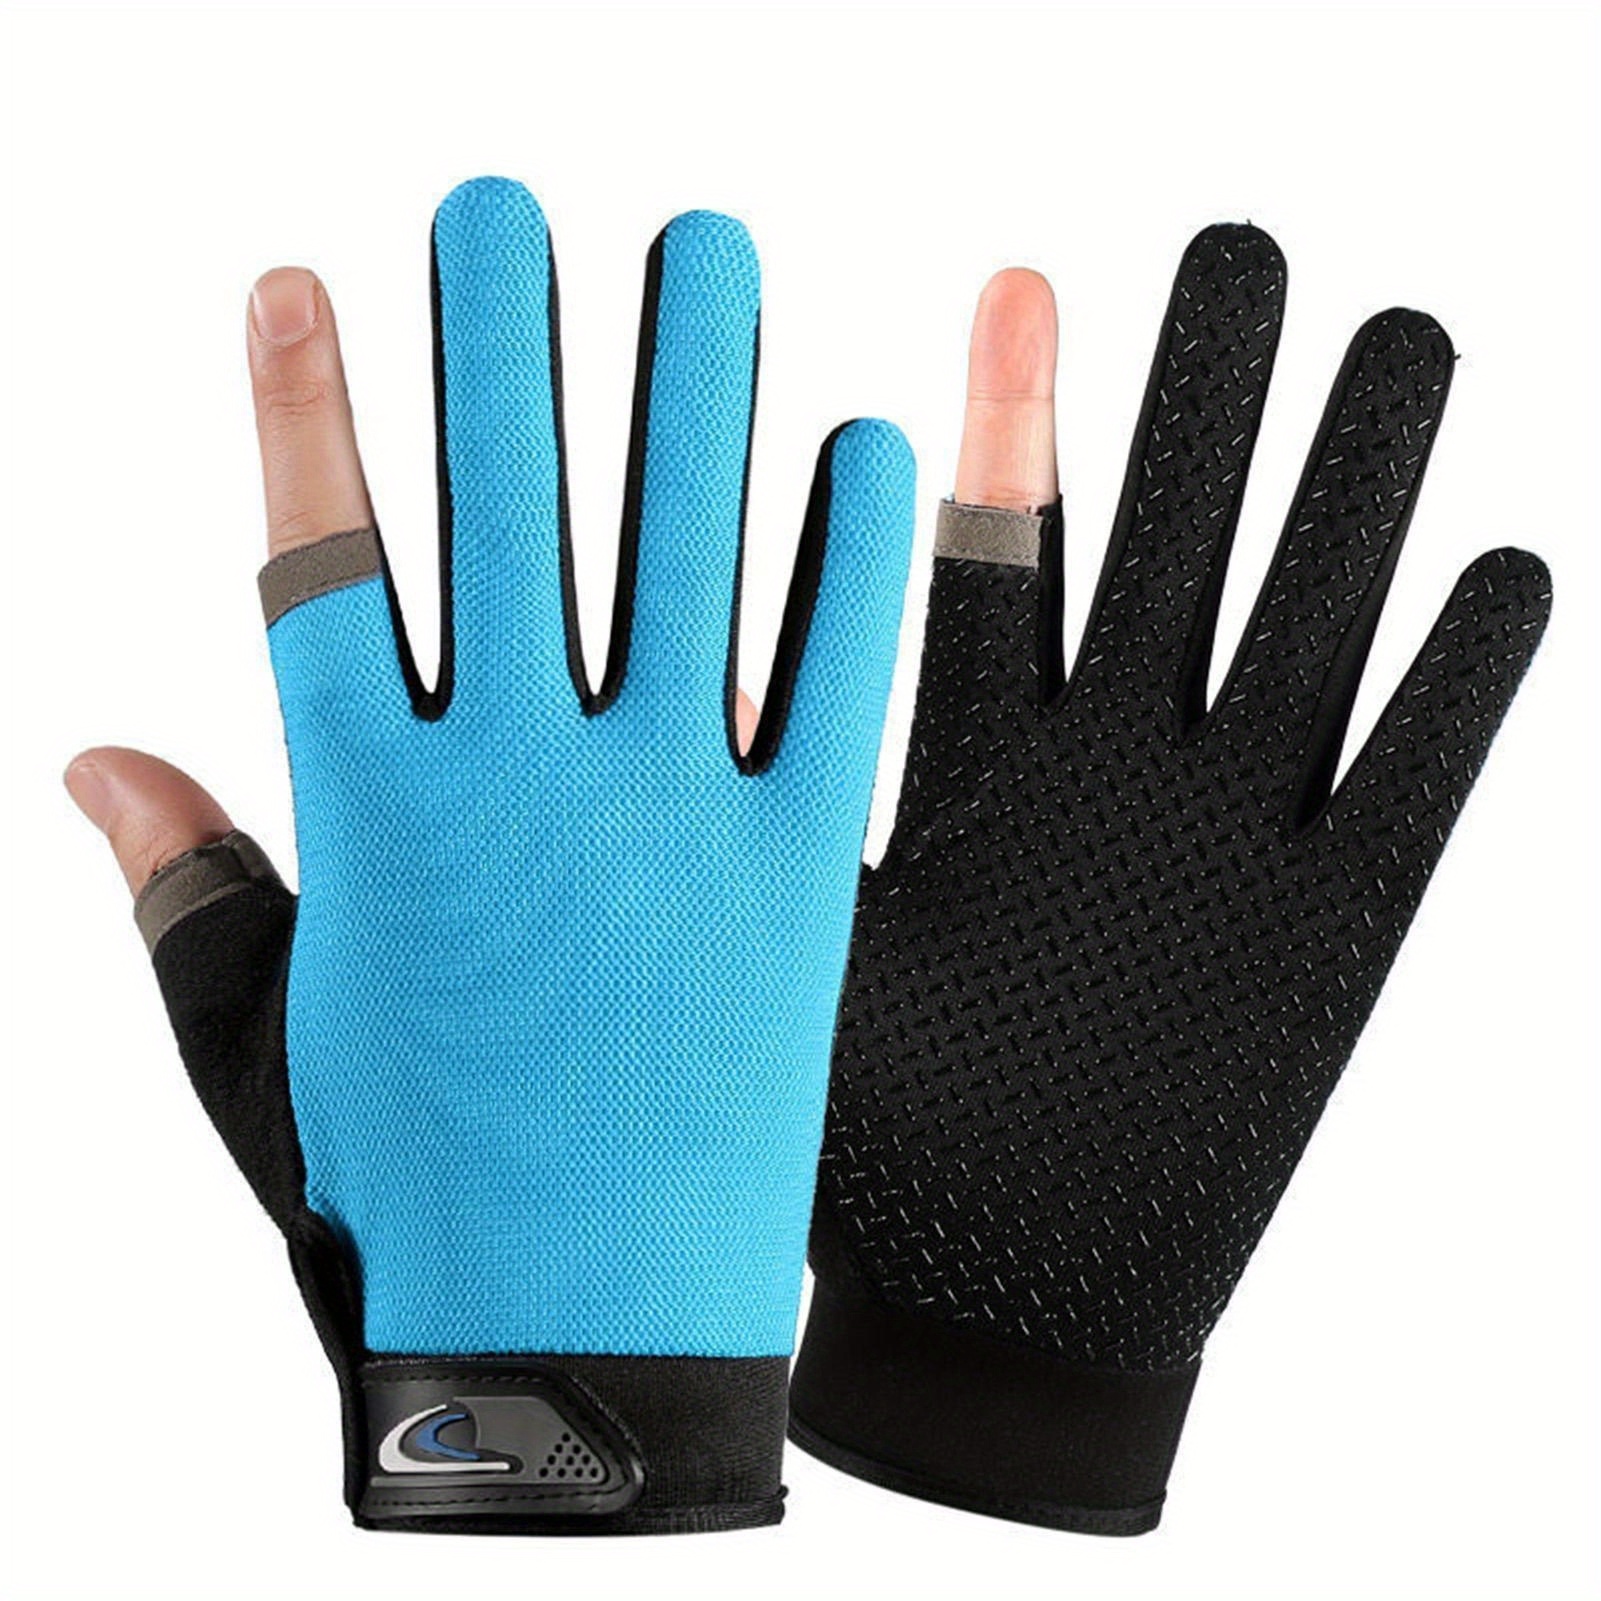 Fingerless Fishing Gloves, Small Portable Touchscreen Outdoor Fishing  Gloves Self Adhesive Wear Resistant For Fishing